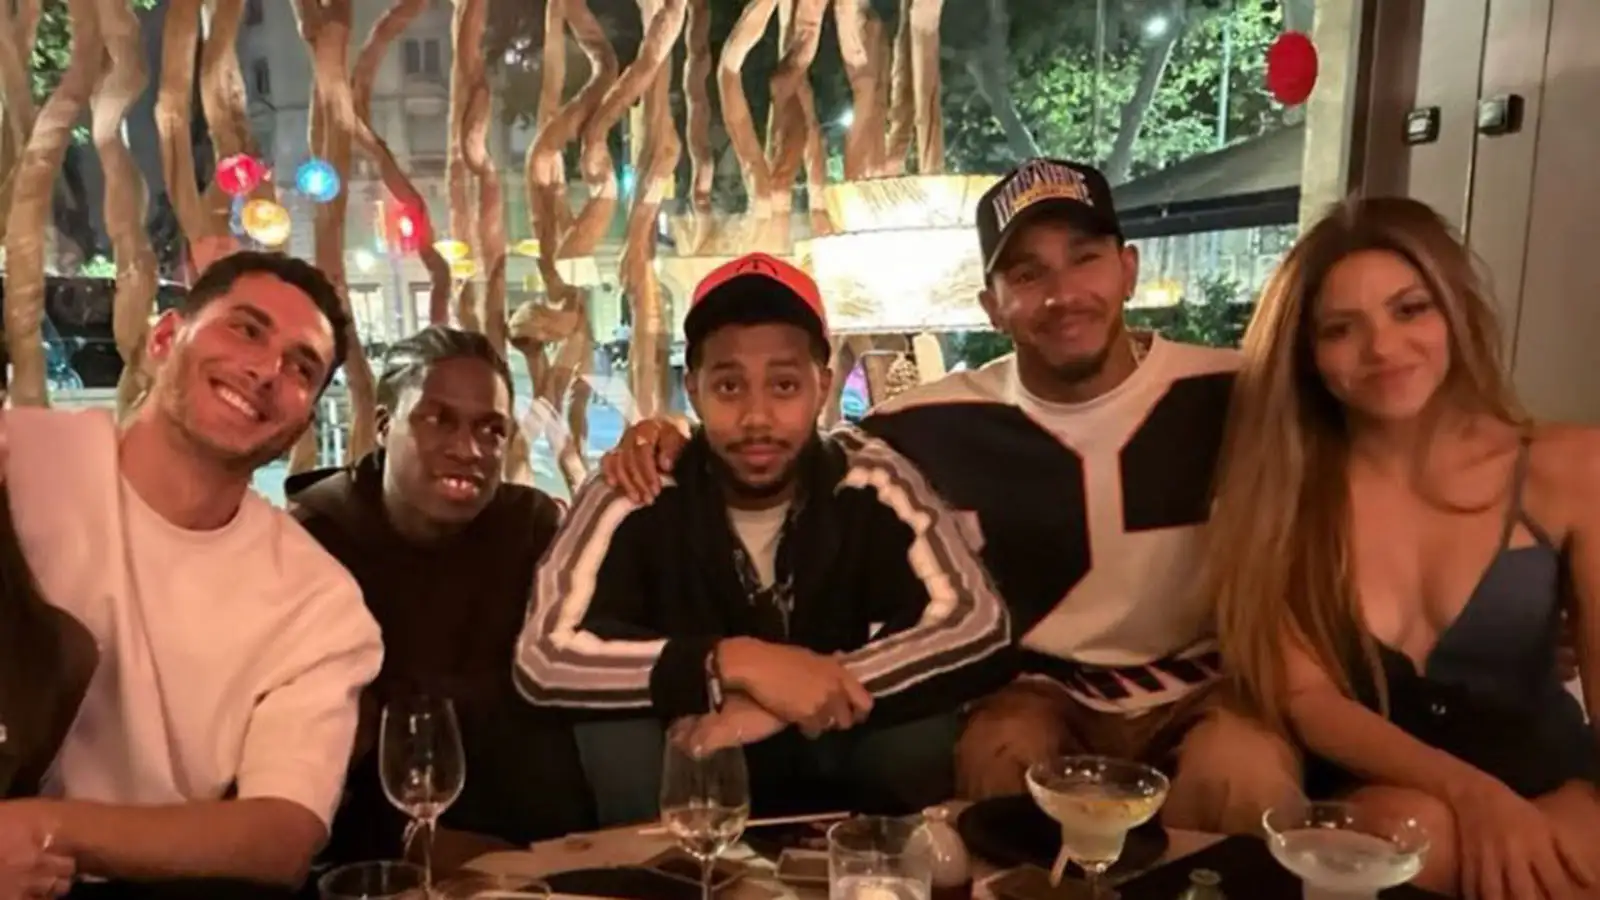 Lewis Hamilton and Shakira dinner with friends. June 2023